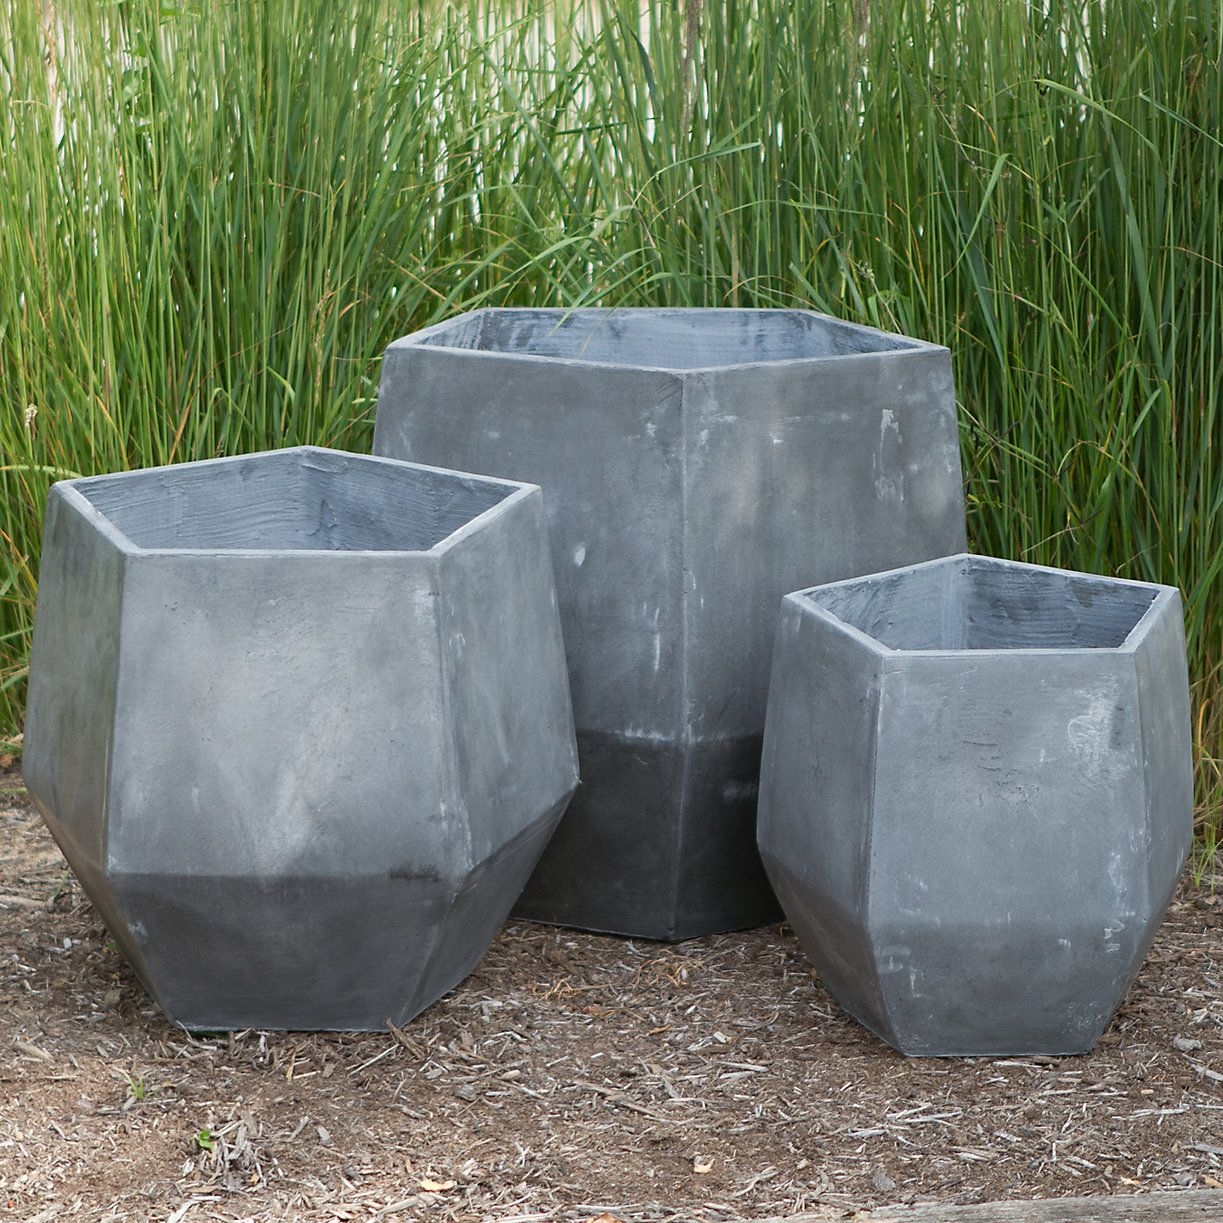 Fiberclay prism pot in gardening planters outdoor planters all weather